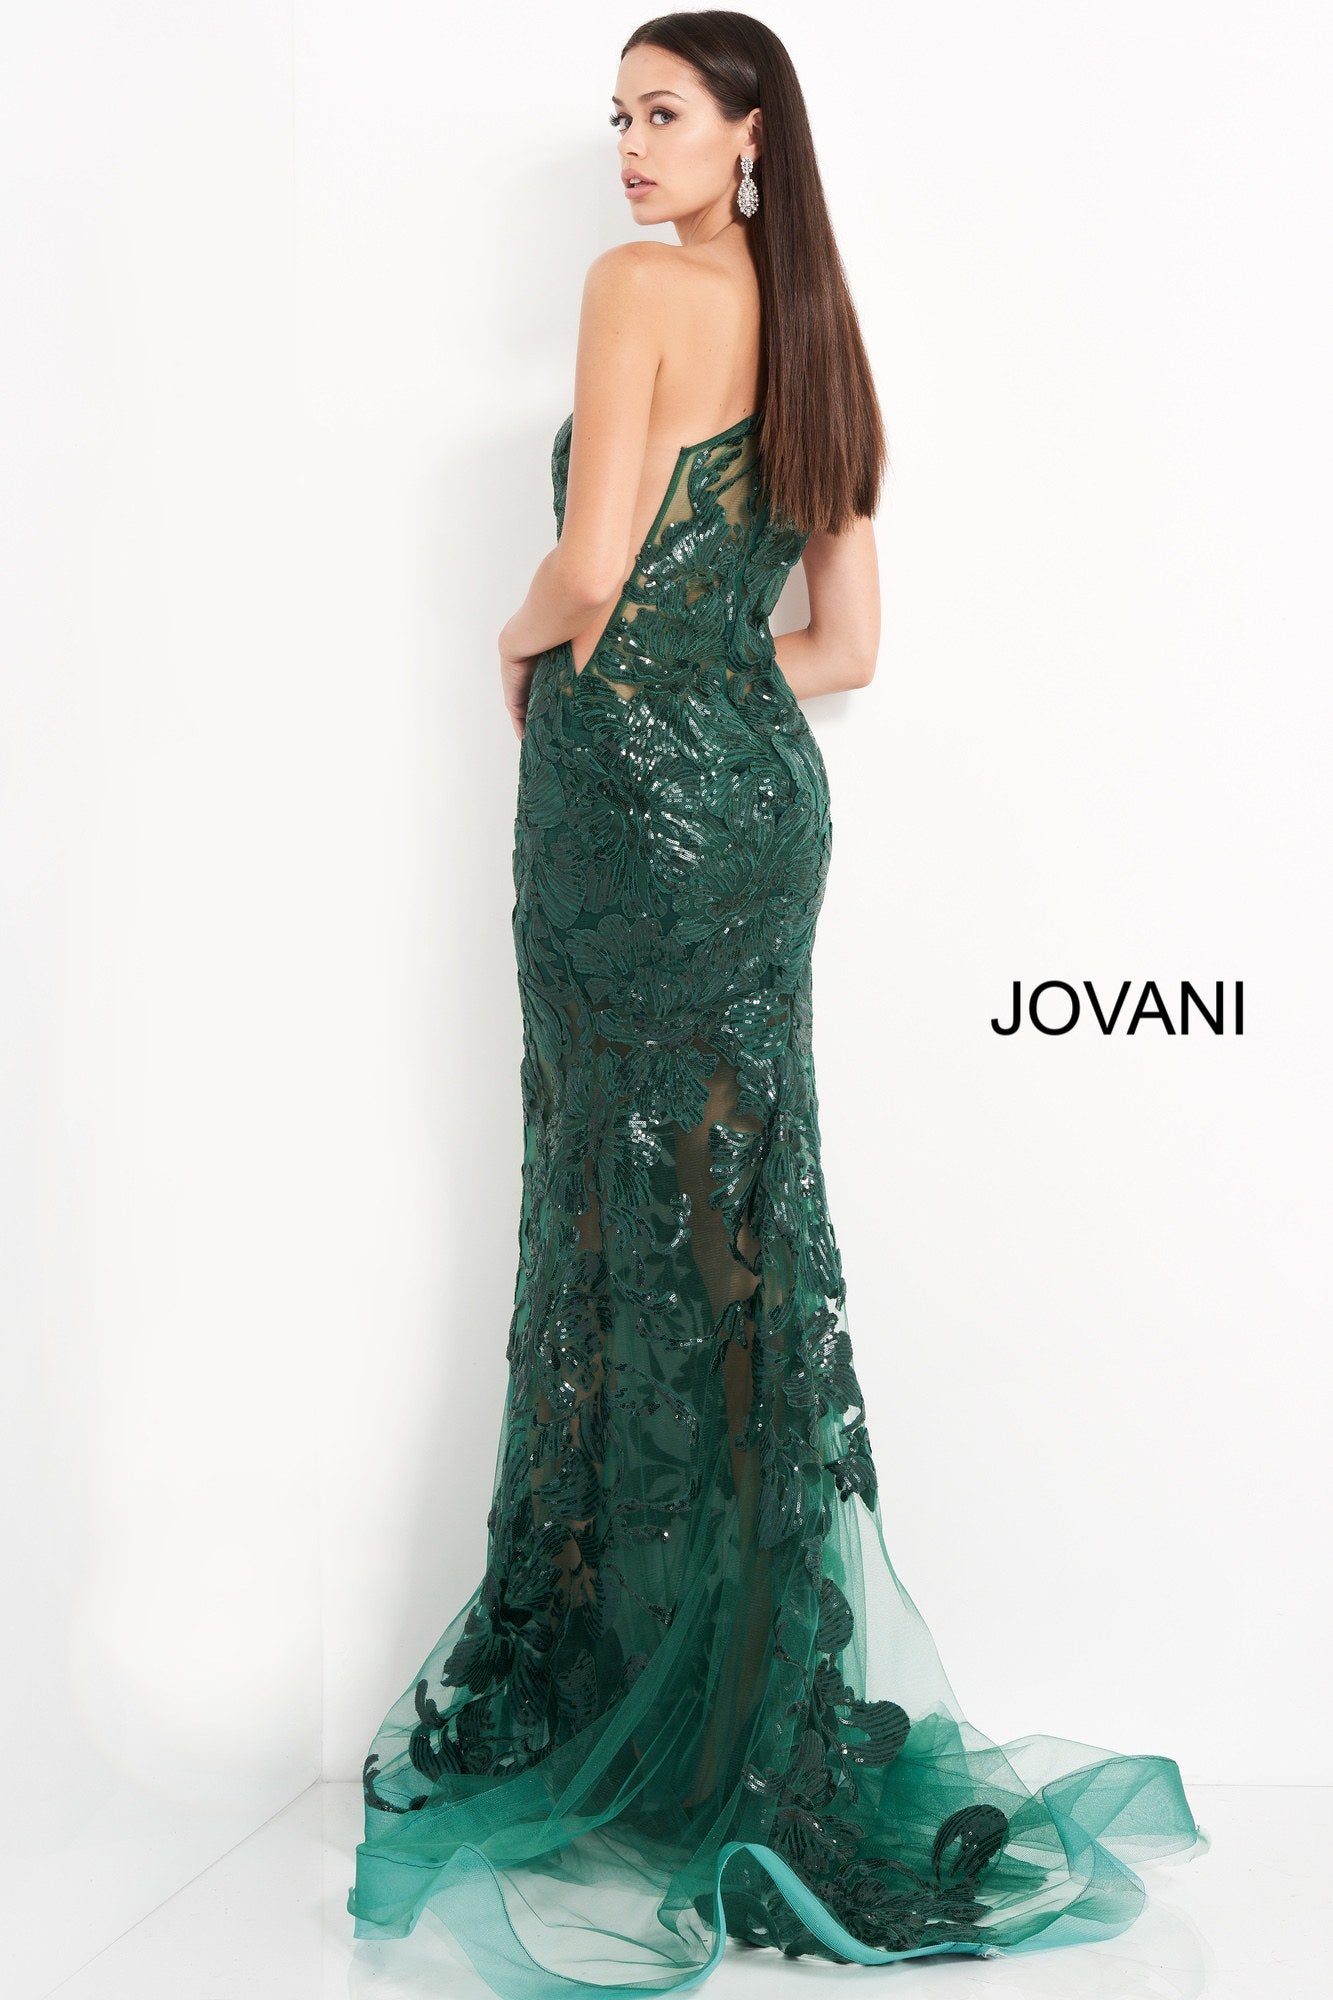 Jovani 02895 is a long fitted one shoulder formal evening gown. Featuring a sheer fitted bodice and skirt. Sequin embellished lace appliques. Mermaid silhouette. sheer side panels with mesh insert. sweeping train with horse hair trim. Great Prom & Pageant Dress.  Available Sizes: 00,0,2,4,6,8,10,12,14,16,18,20,22,24  Available Colors: black, forest, light-blue, red, rose/gold, royal, w